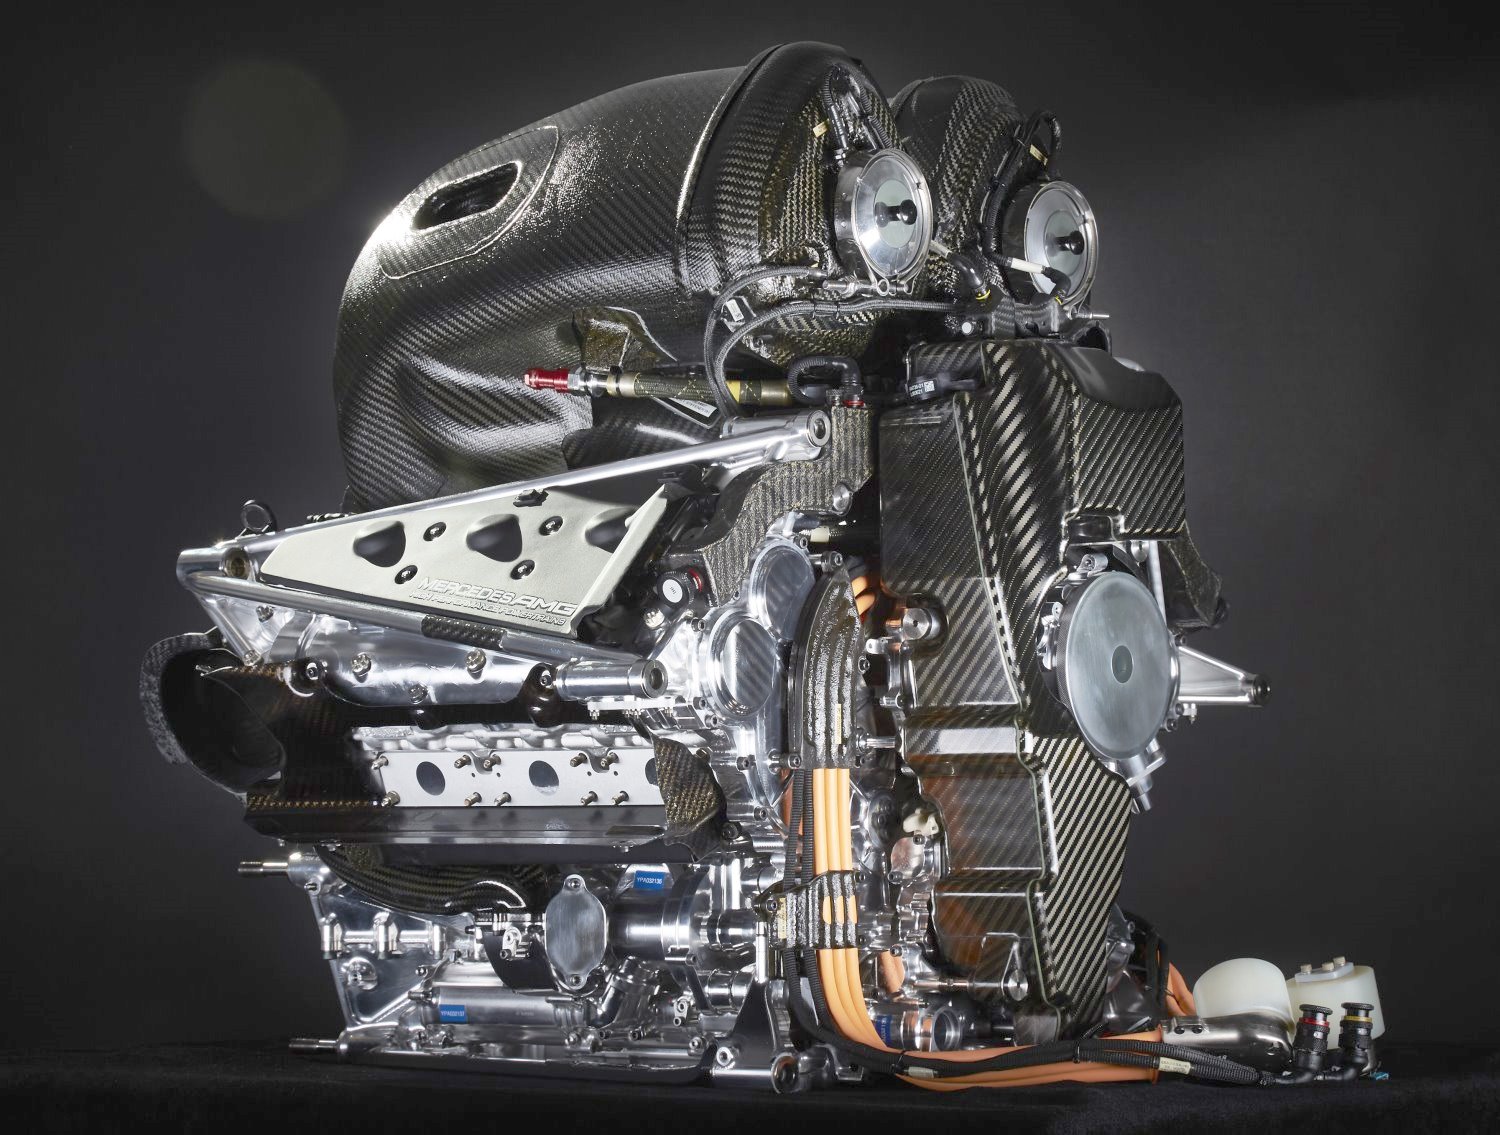 The silly hybrid F1 engines that Mercedes came up with has driven F1 costs through the roof